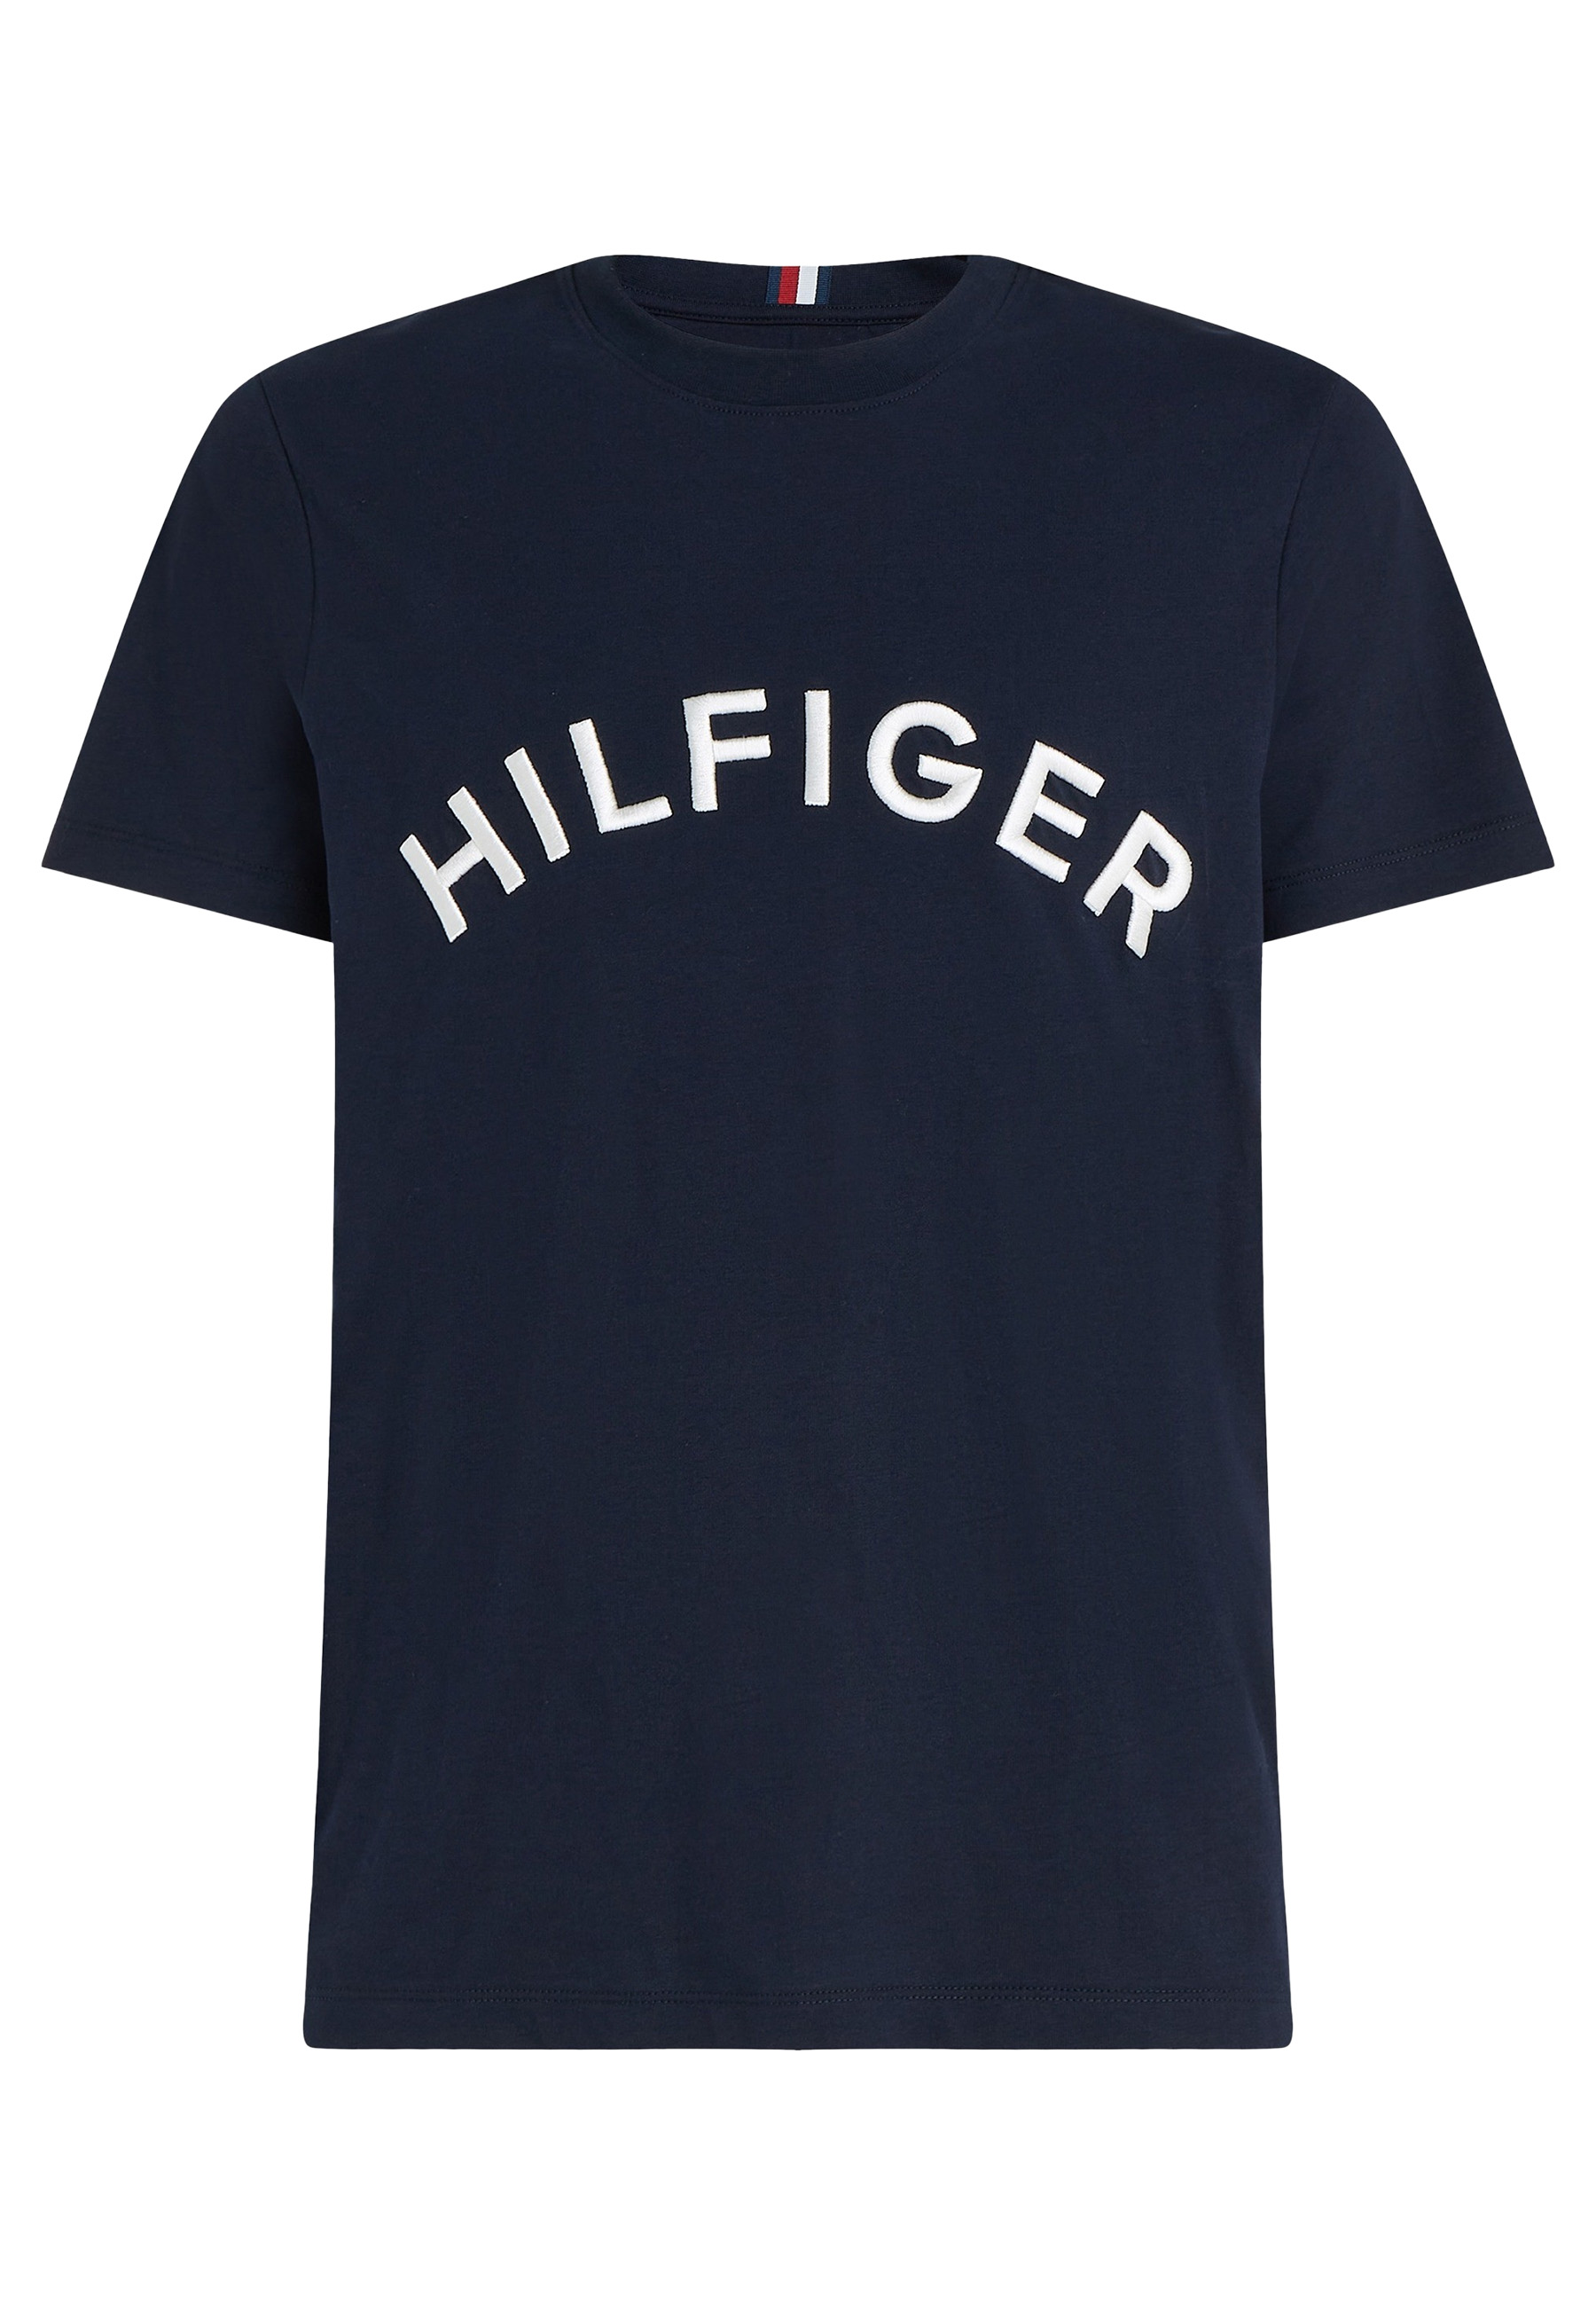 Tommy Hilfiger Hilfiger arched t-shirts donkerblauw Heren maat S